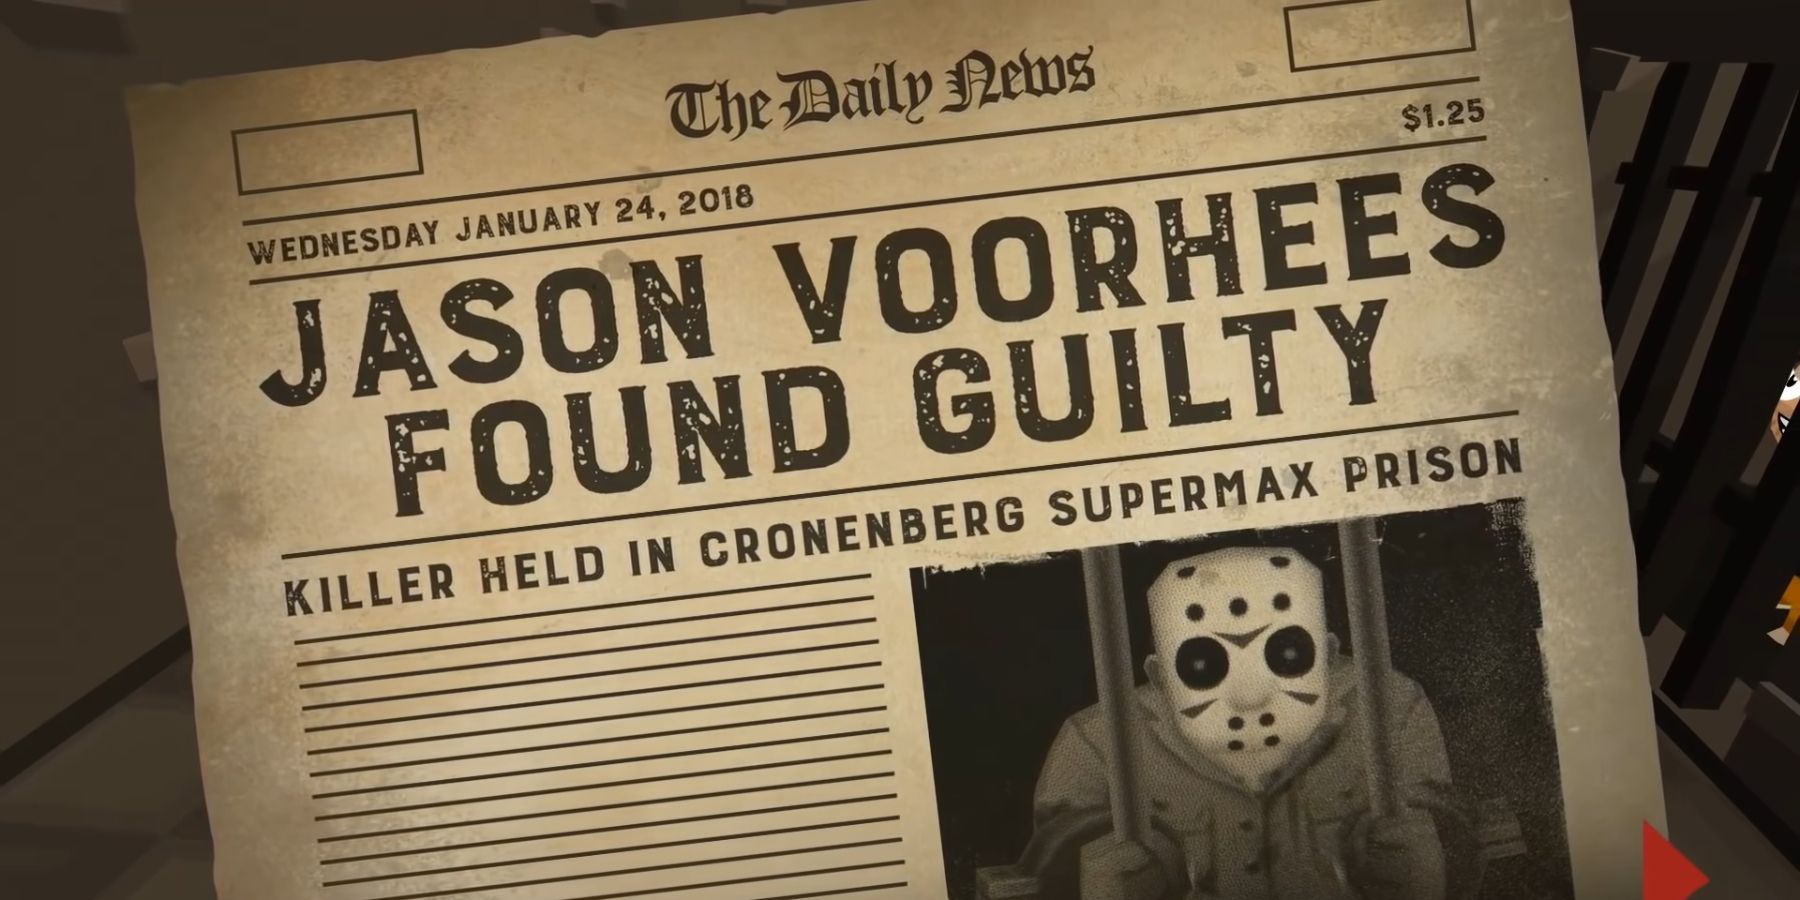 Newspaper showing Jason being convicted in Friday The 13th Killer Puzzle